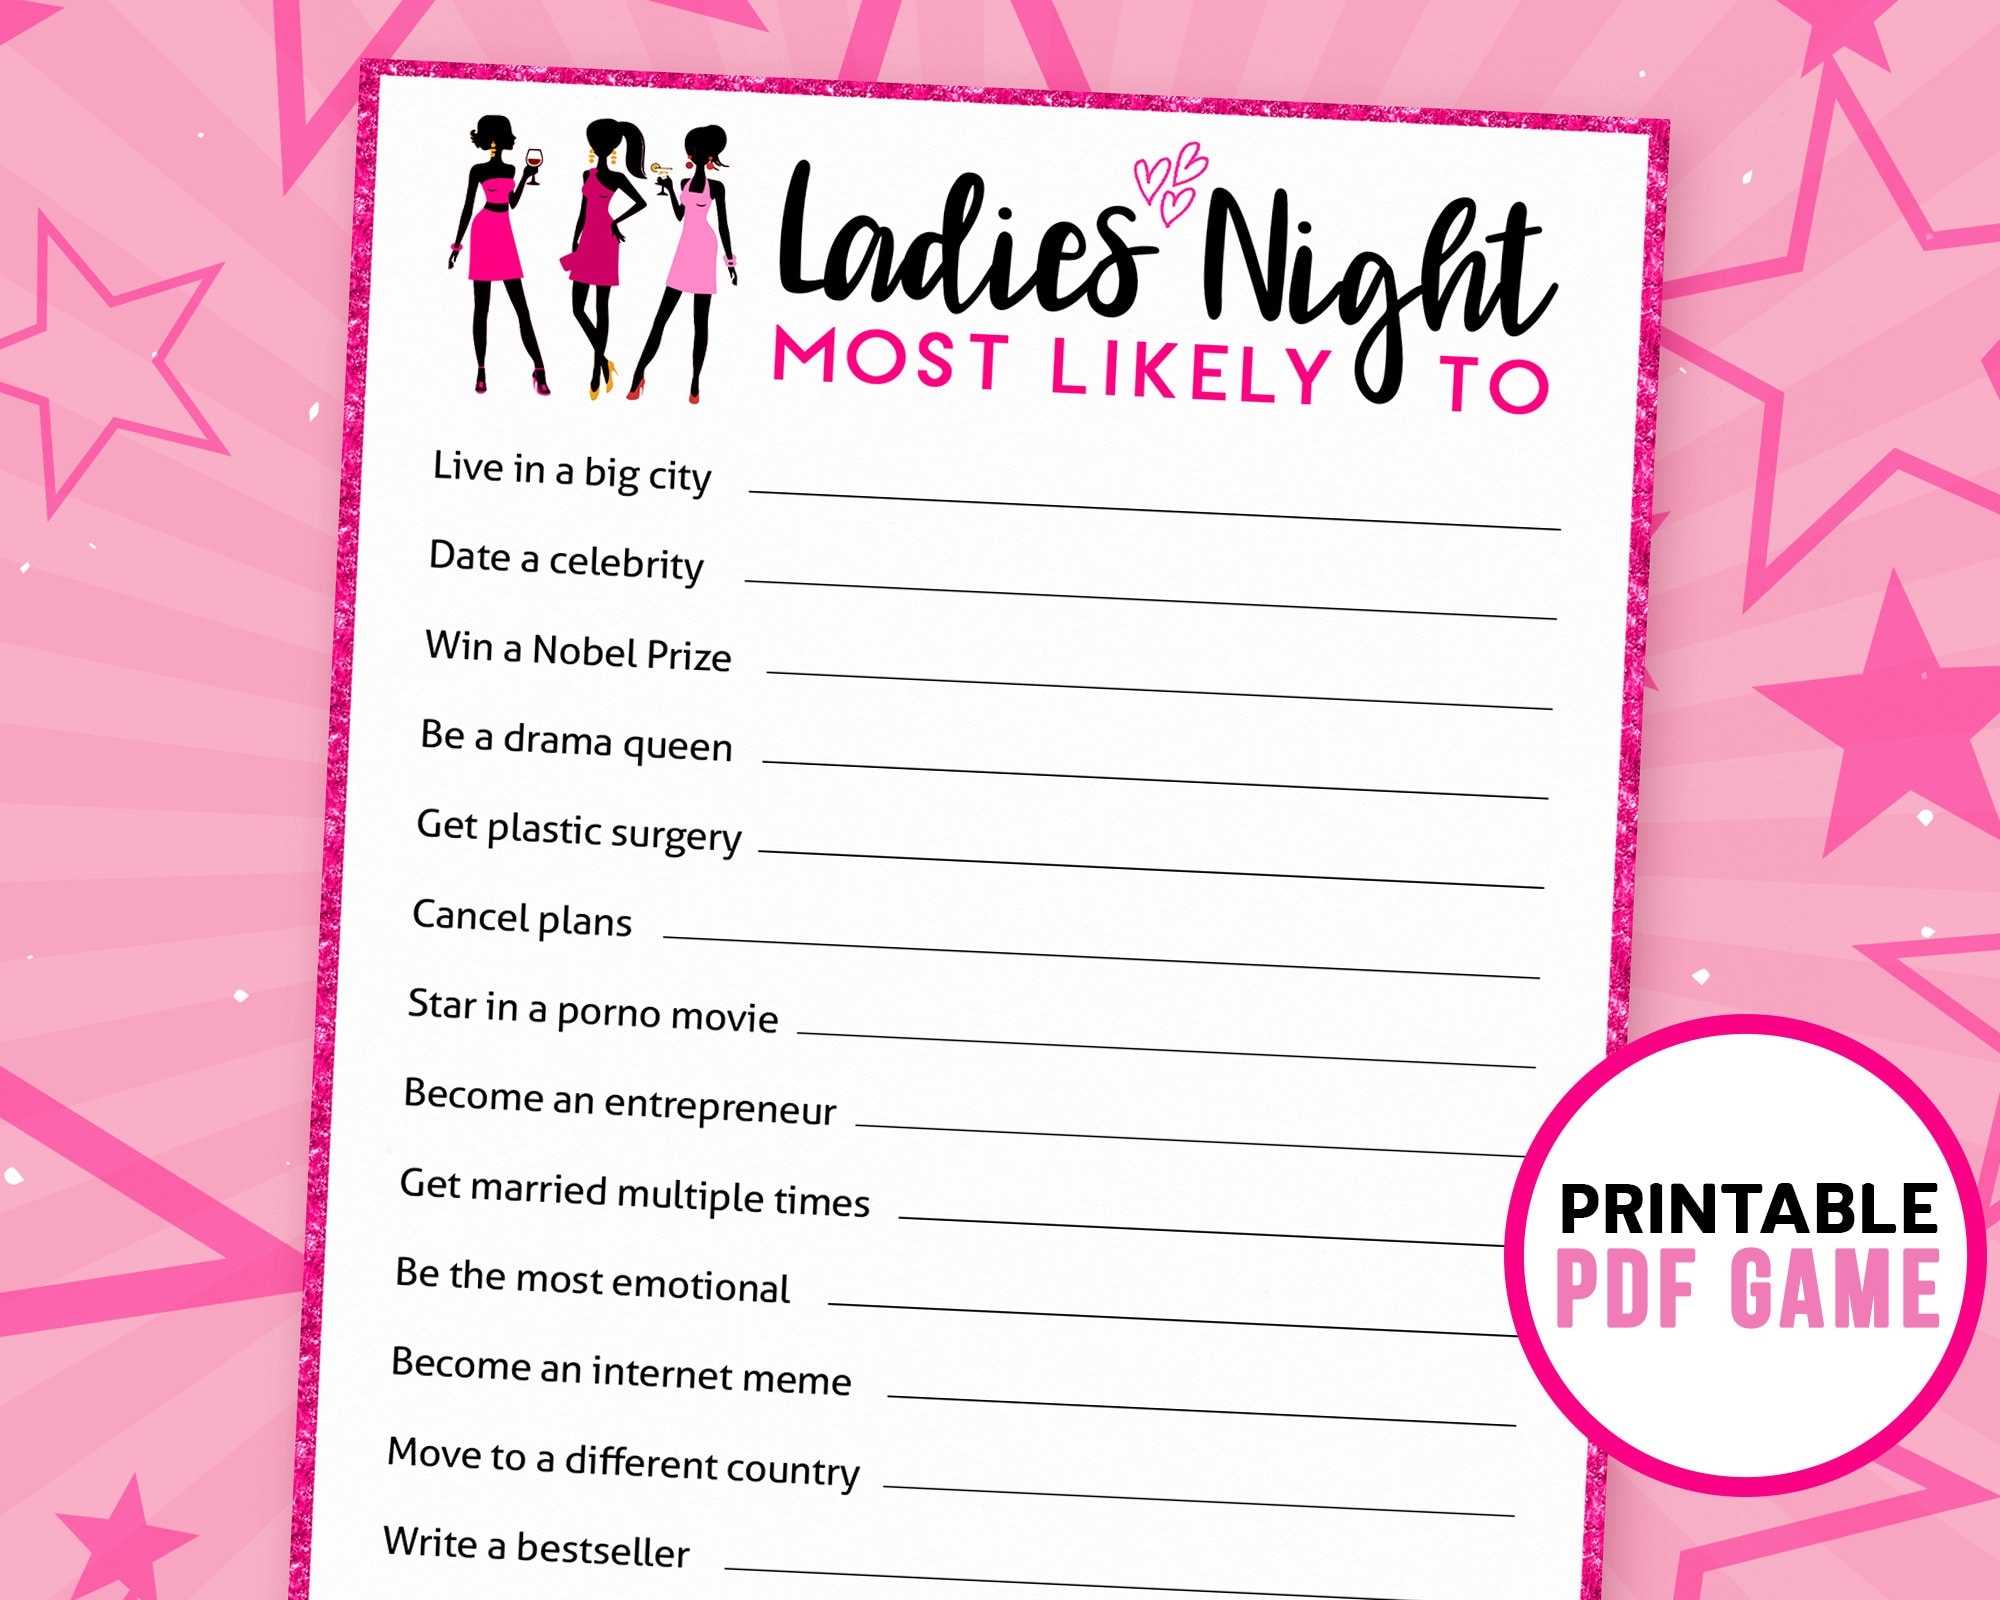 Who Is Most Likely To Fun Ladies Night Games Girls Night Games Hen Party Printable Games Bachelorette Game Includes Free Bingo Etsy